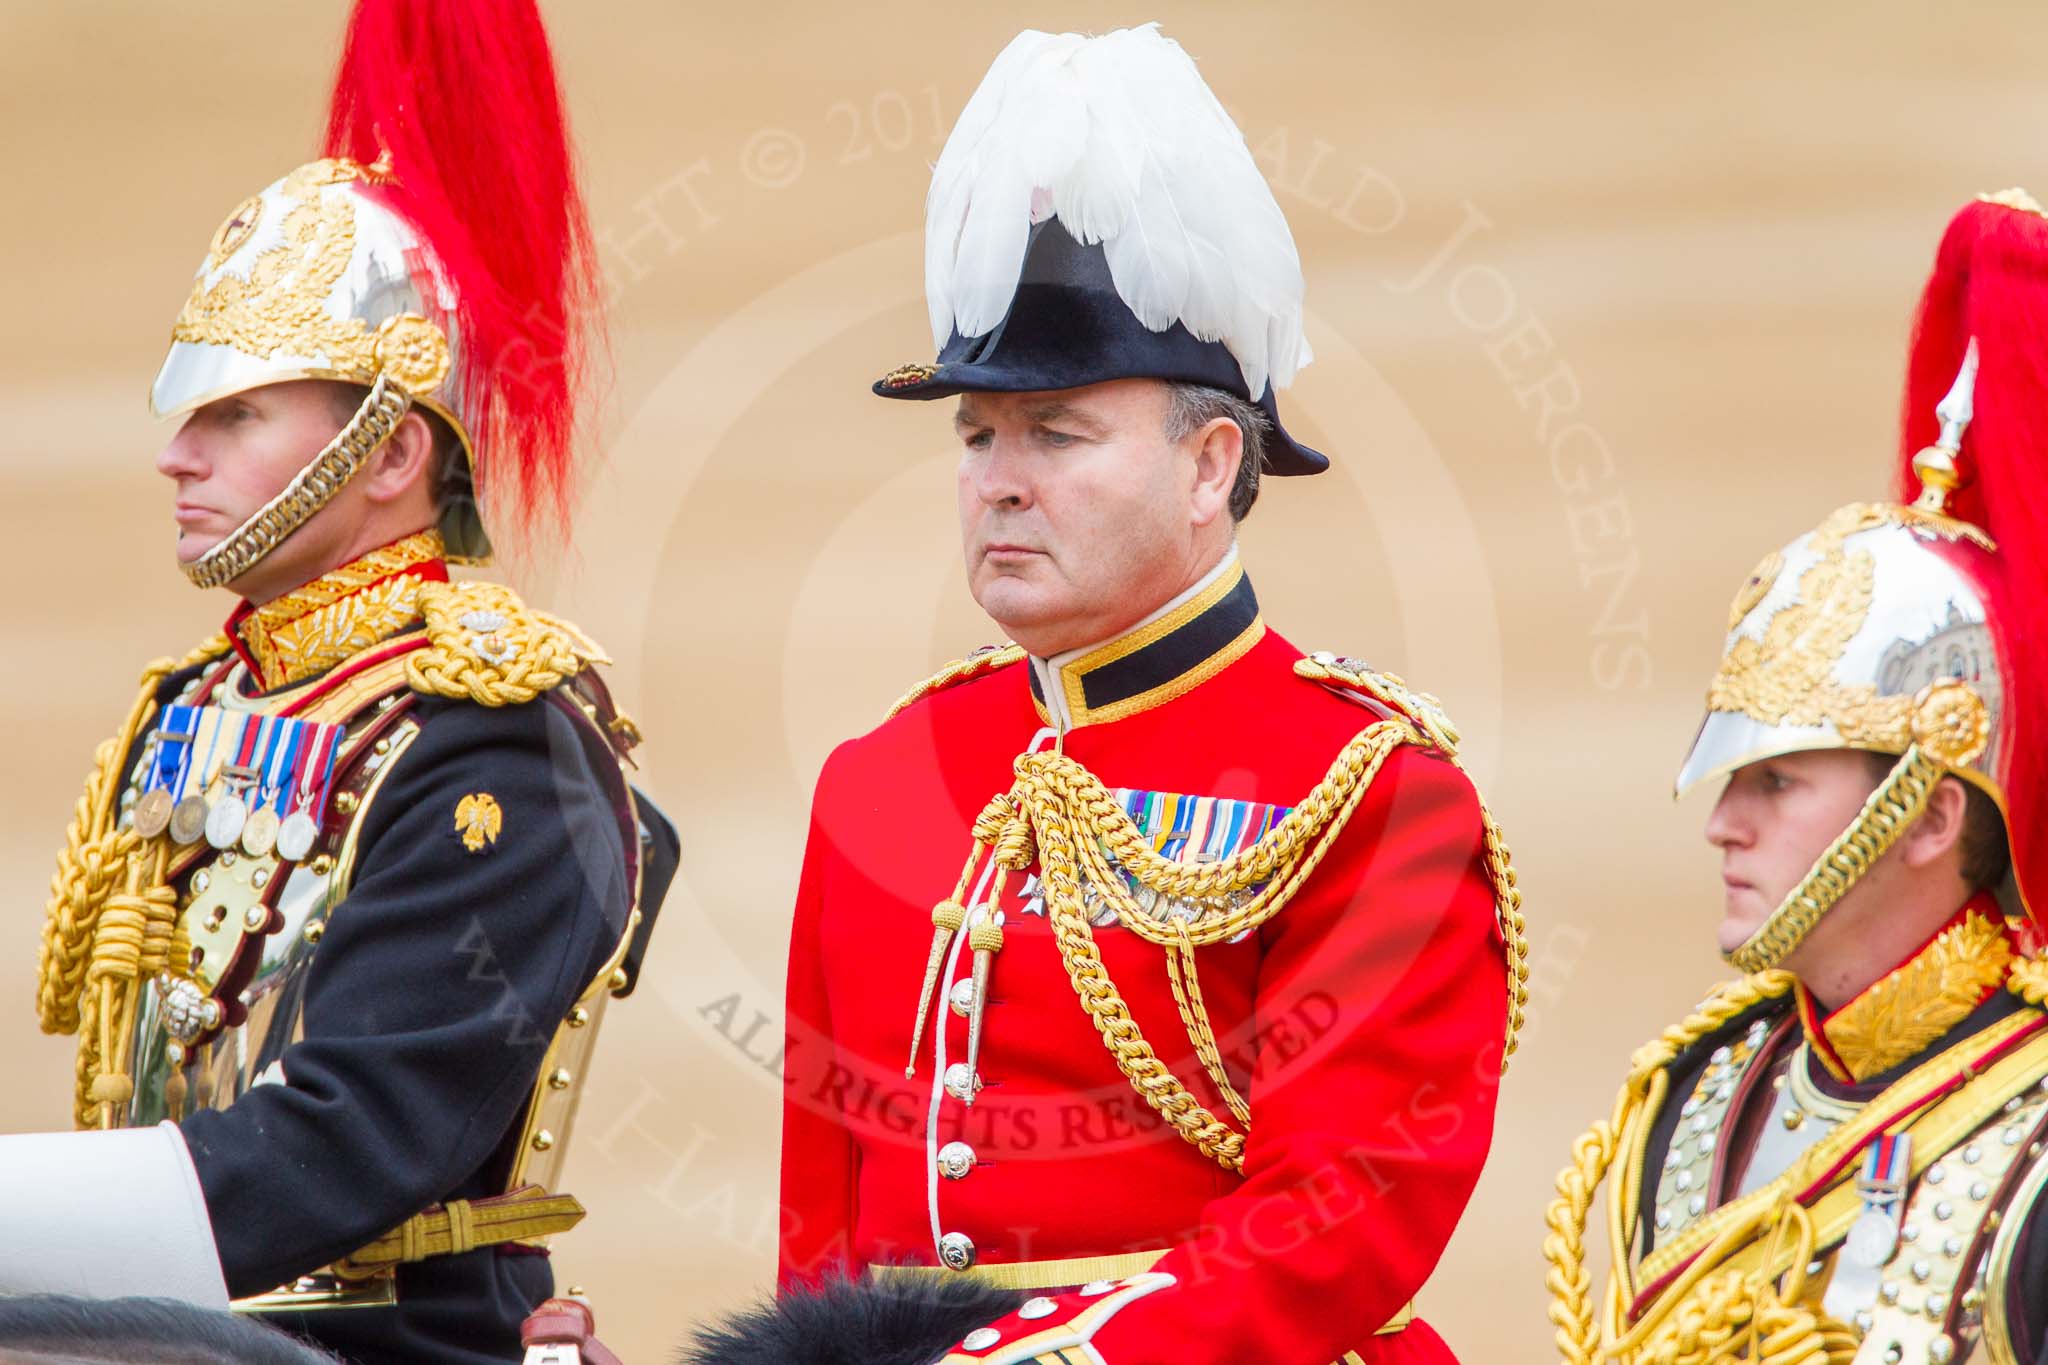 Trooping the Colour 2014.
Horse Guards Parade, Westminster,
London SW1A,

United Kingdom,
on 14 June 2014 at 11:03, image #397